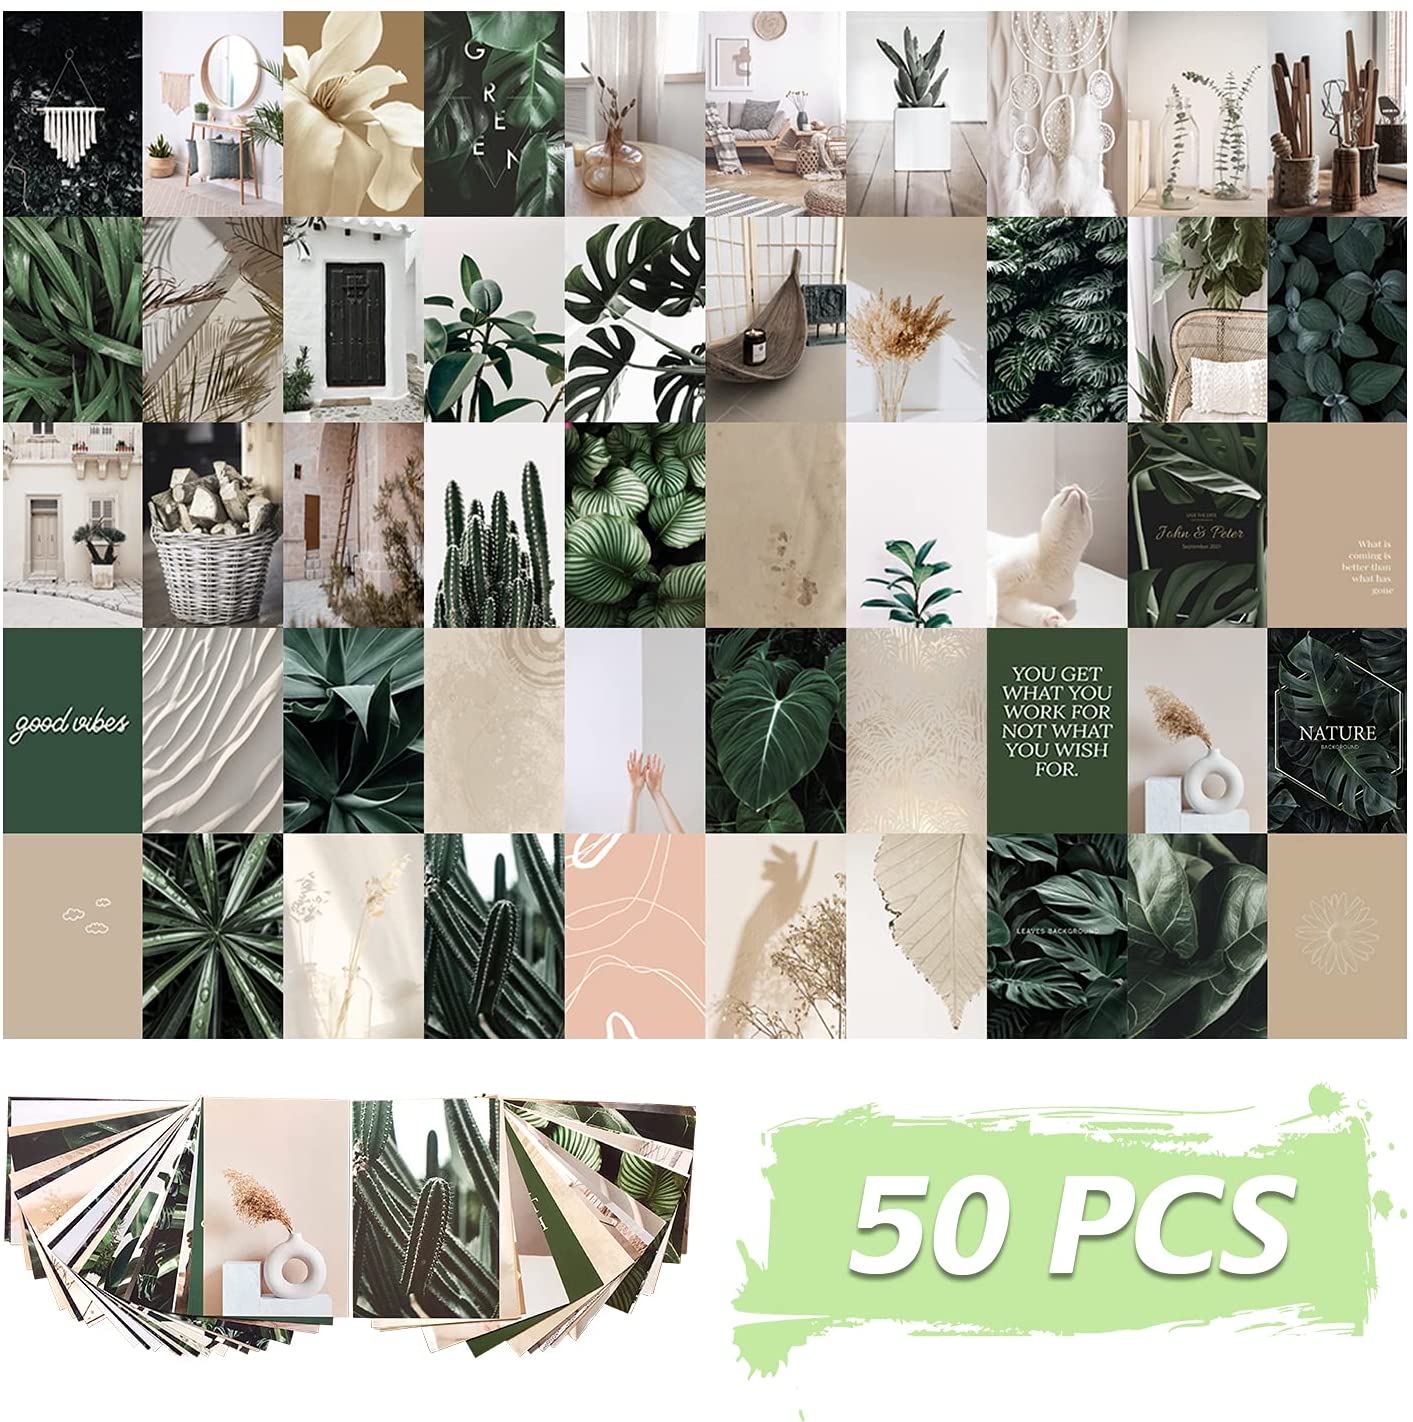 Buy Boho Room Decor, Wall Collage Kit Aesthetic Picture, Photo Collage Kit for Green Room Decor (50 PCS, 4x6 Inch) Online in Cameroon. B09CKKG3KX